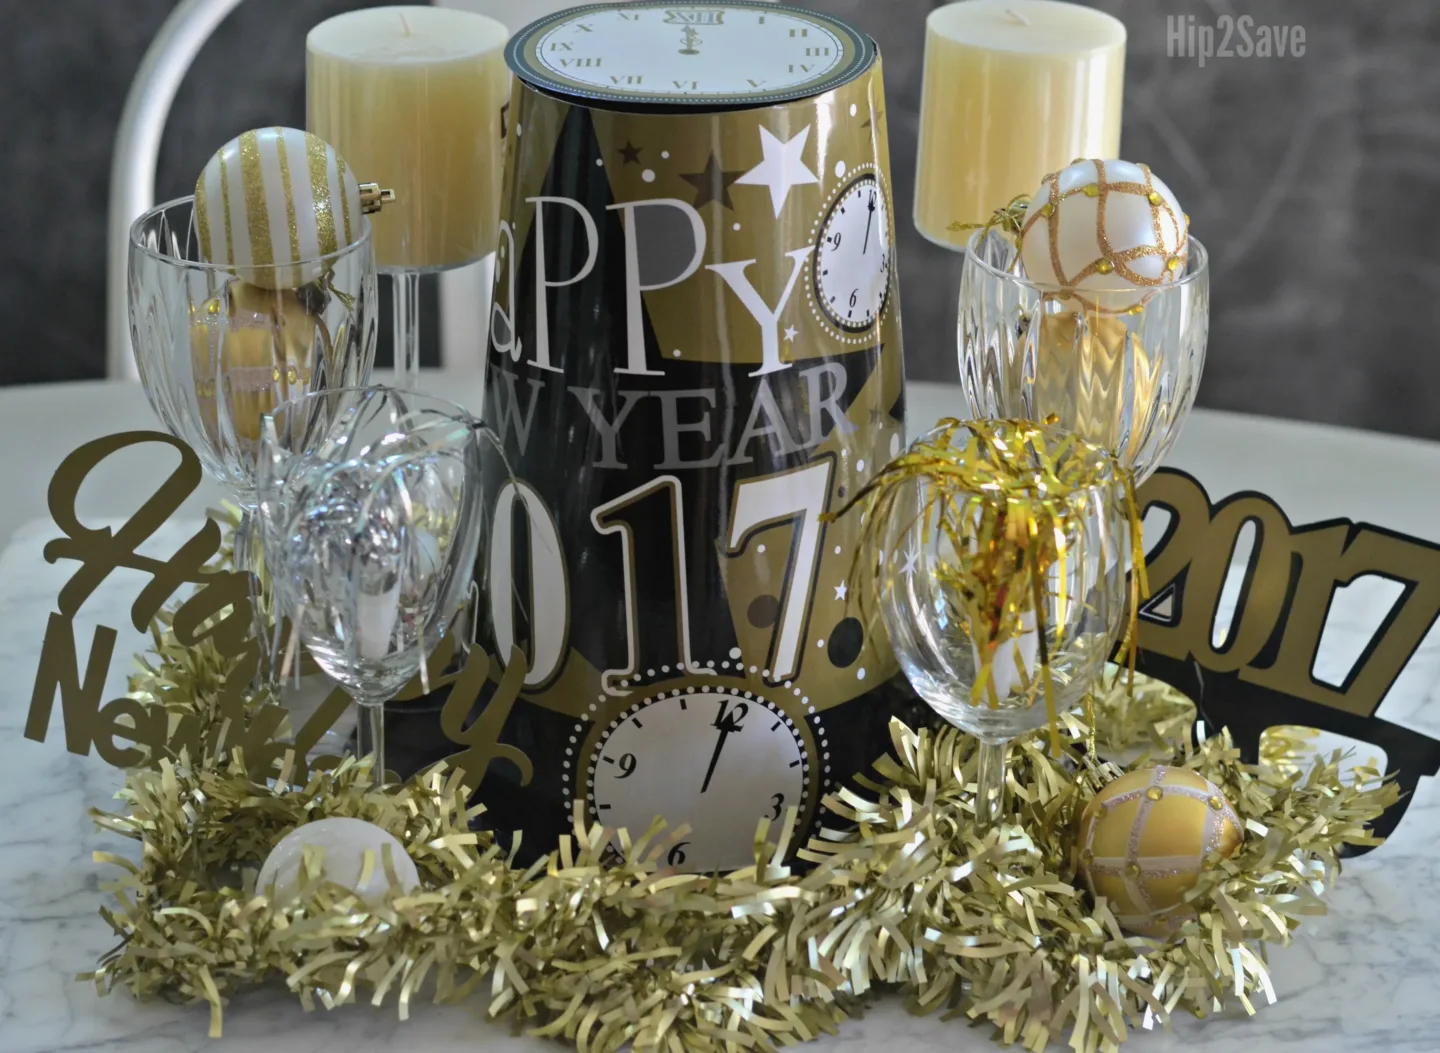 New year´s centerpiece with dollar store items